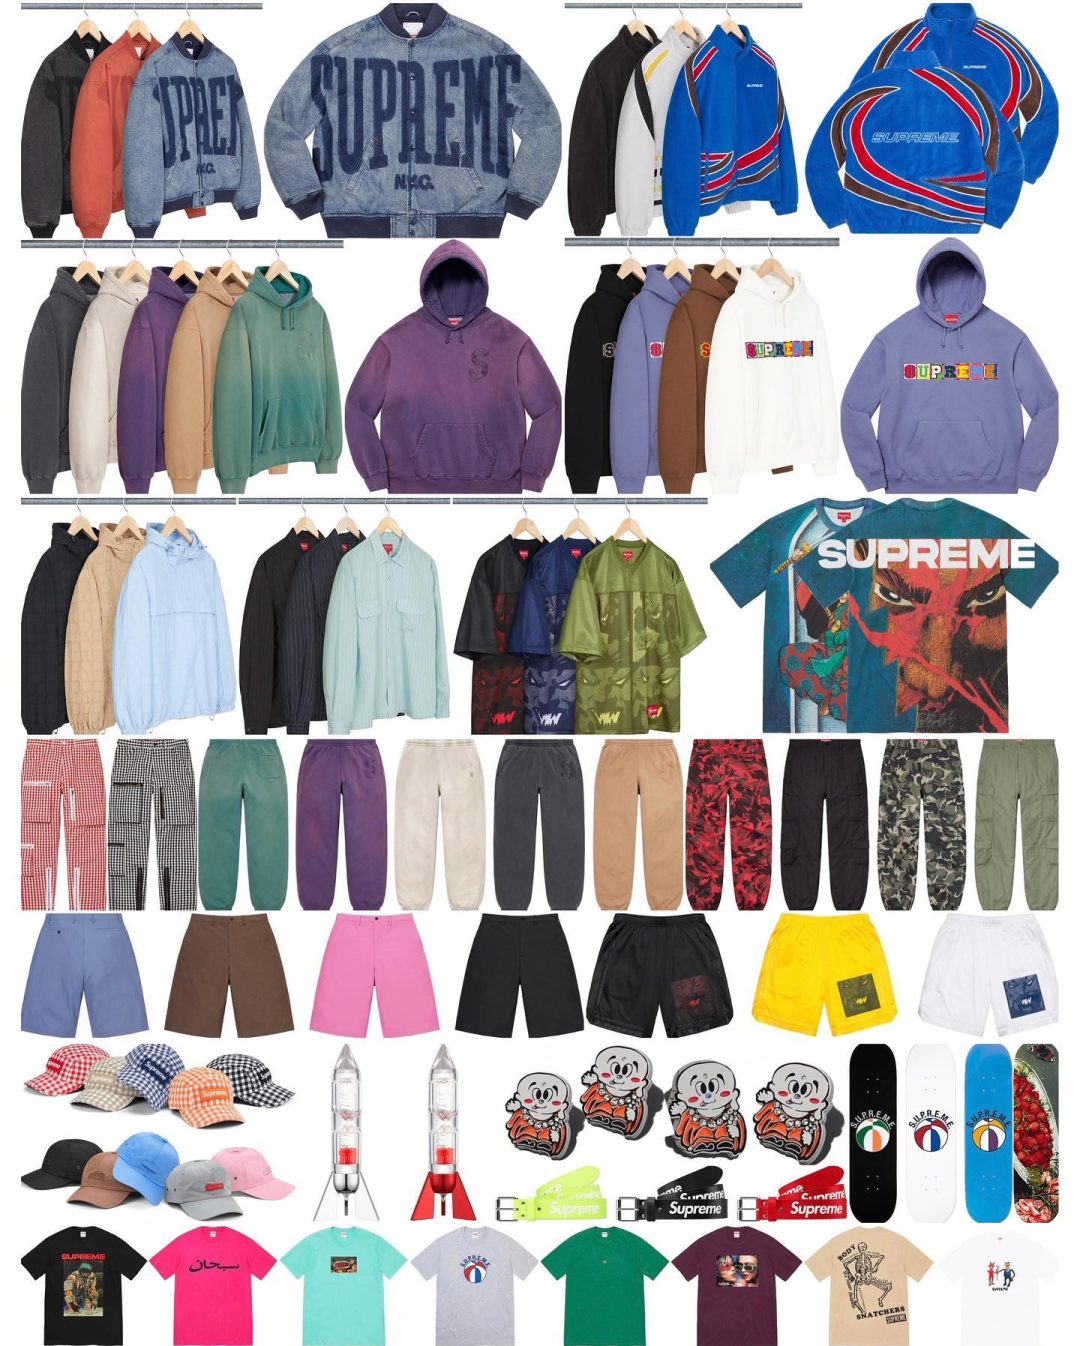 Supreme 公式通販サイトで4月22日 Week9に発売予定の23SS 新作アイテム 